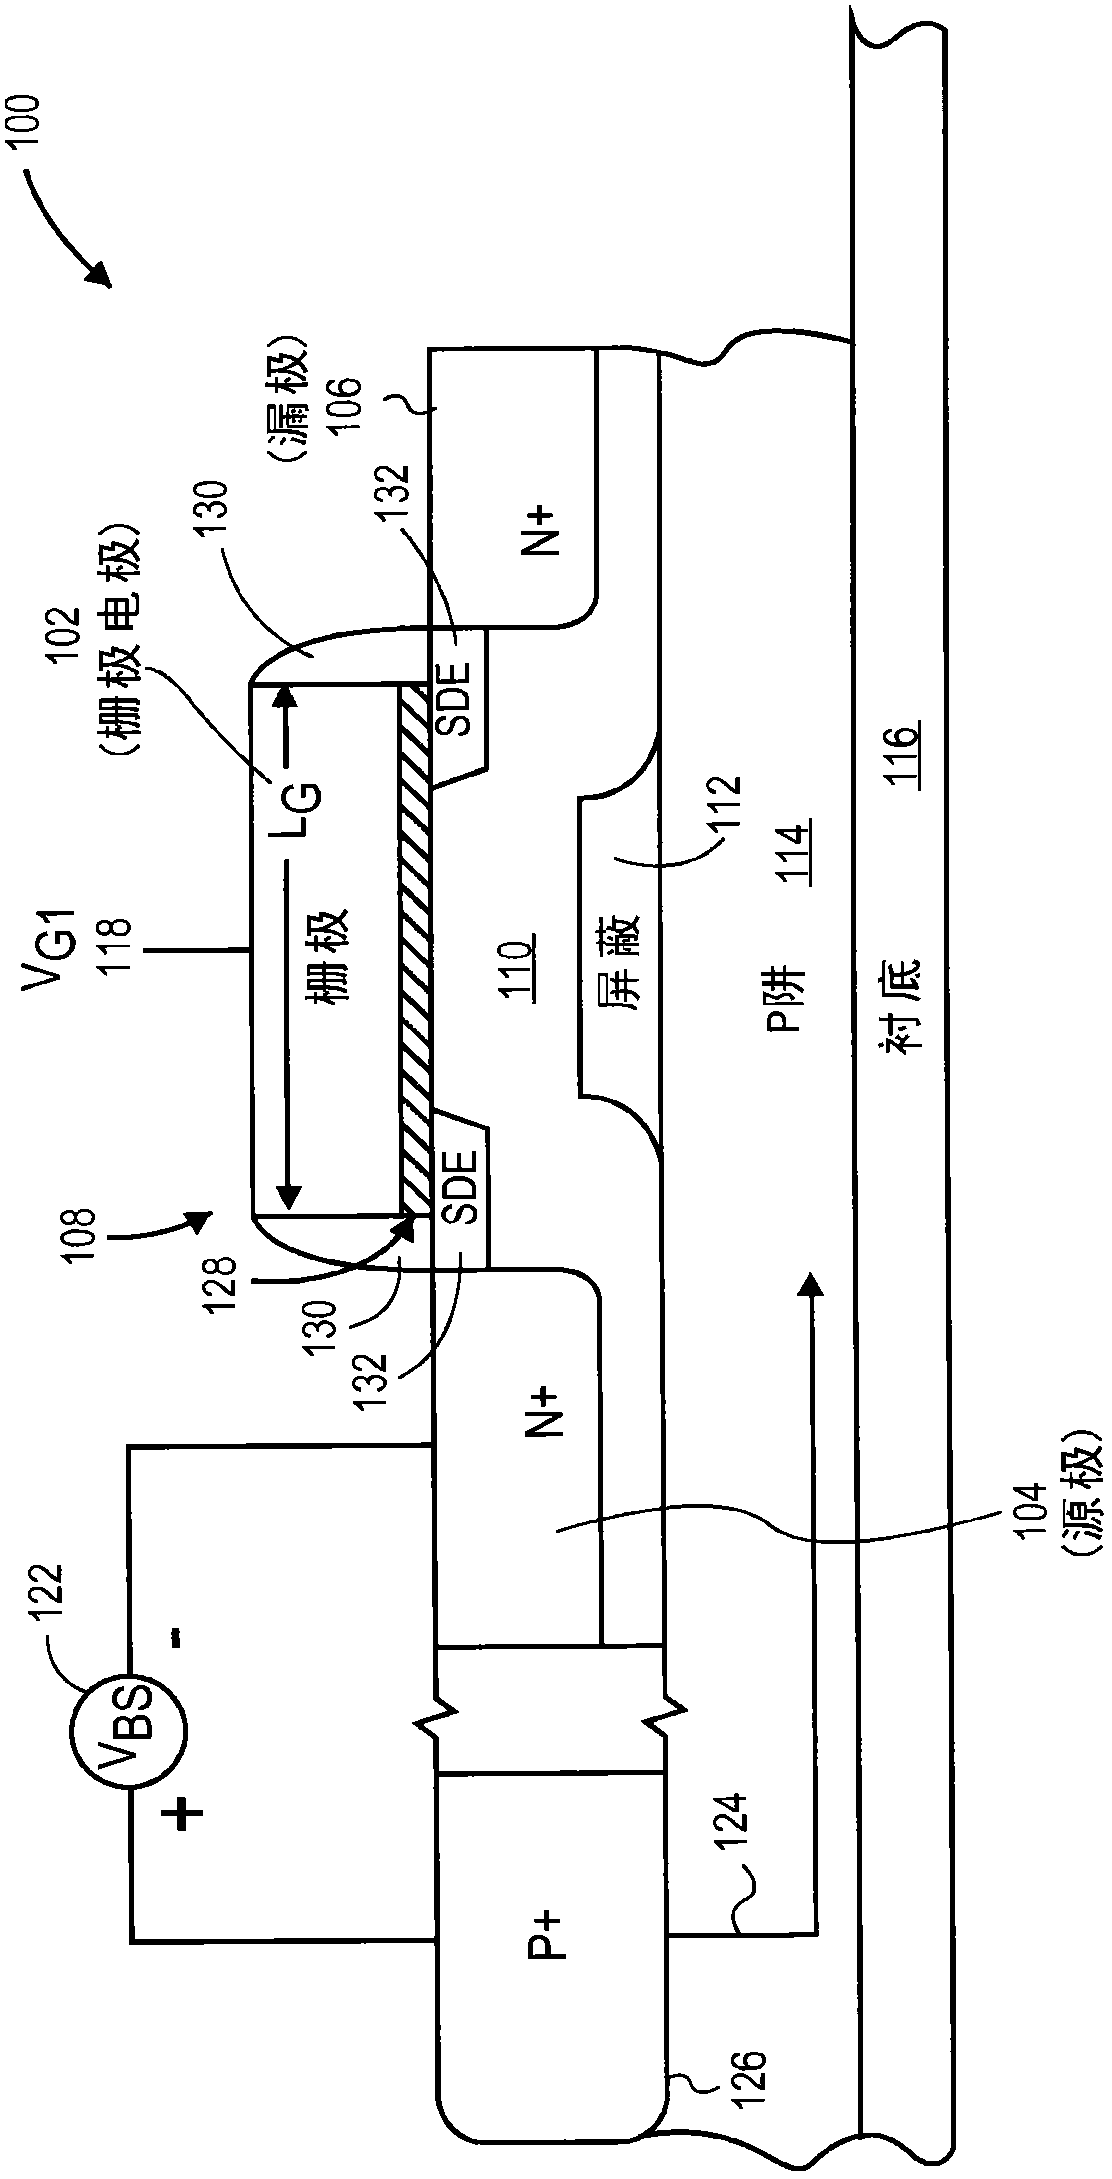 Electronic devices and systems, and methods for making and using the same